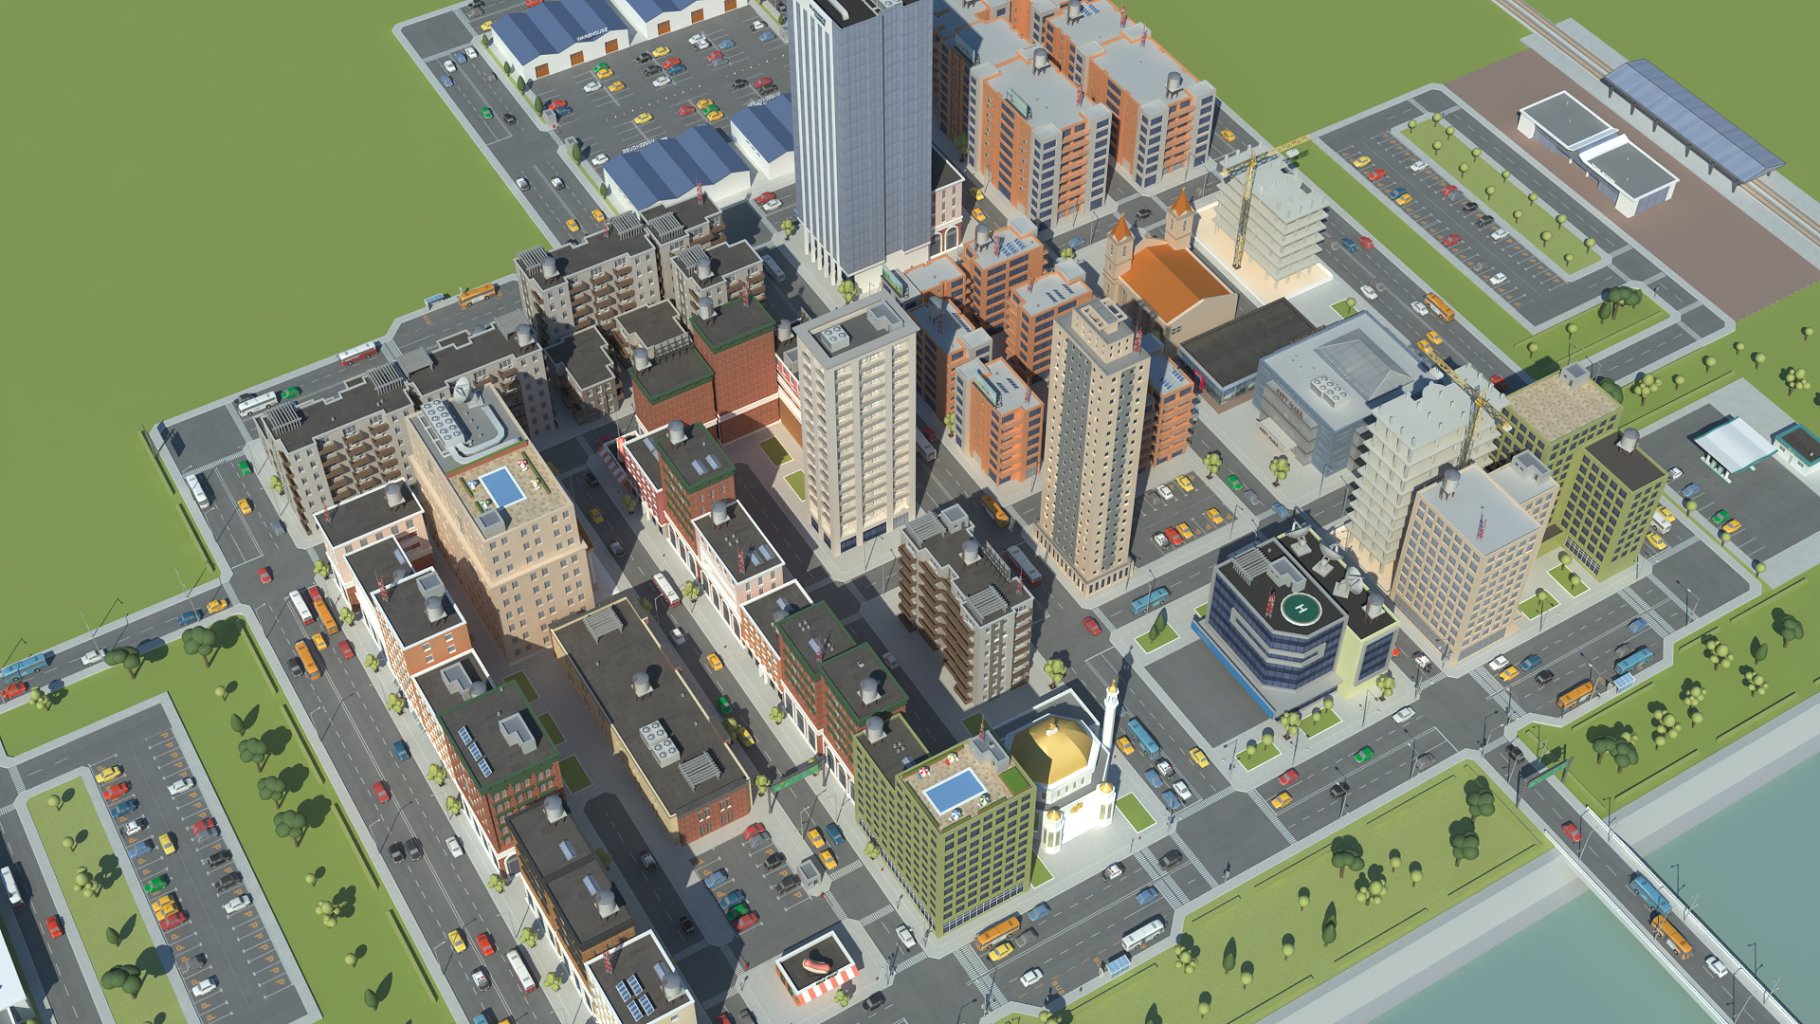 Rendering of a wonderful low-poly 3d model of the city